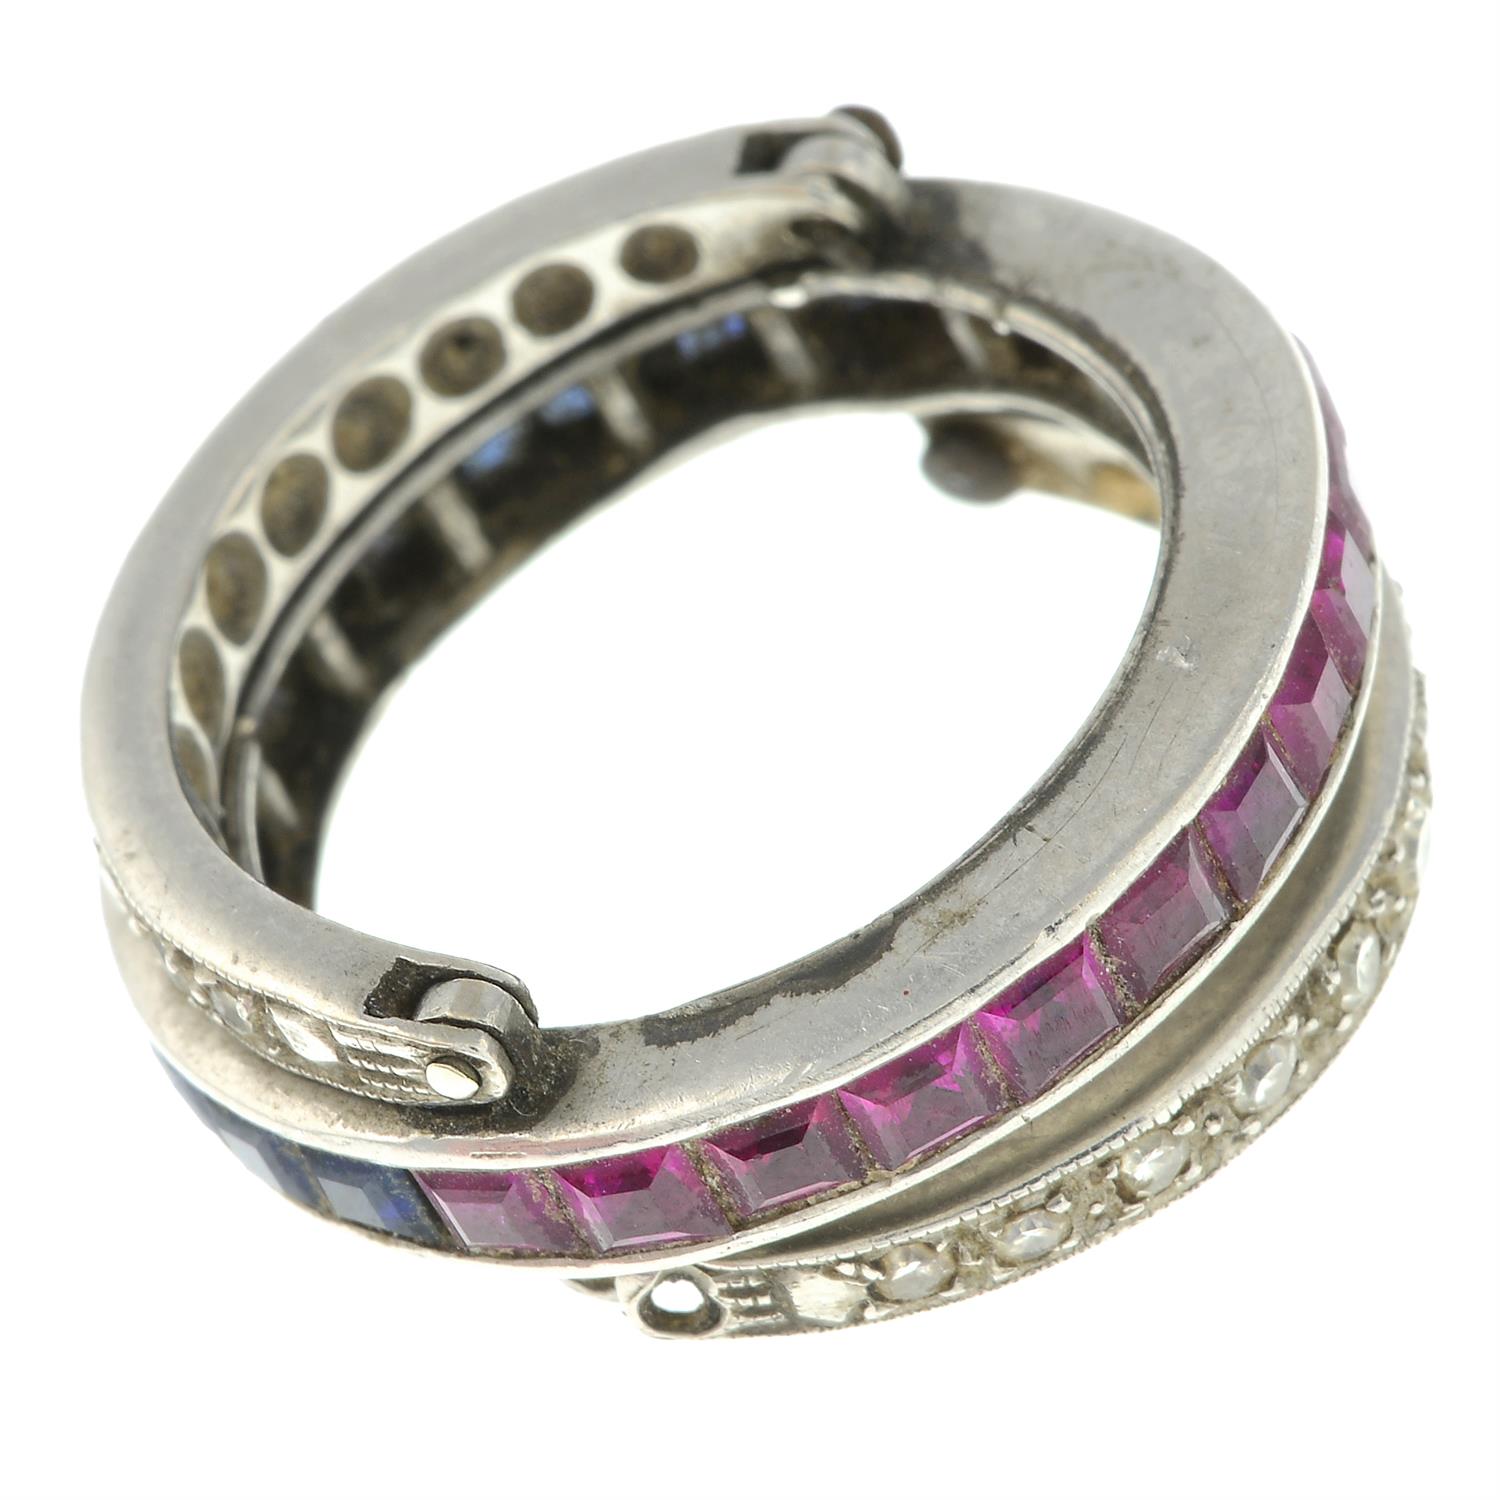 Diamond, synthetic ruby & sapphire hinged ring - Image 2 of 2